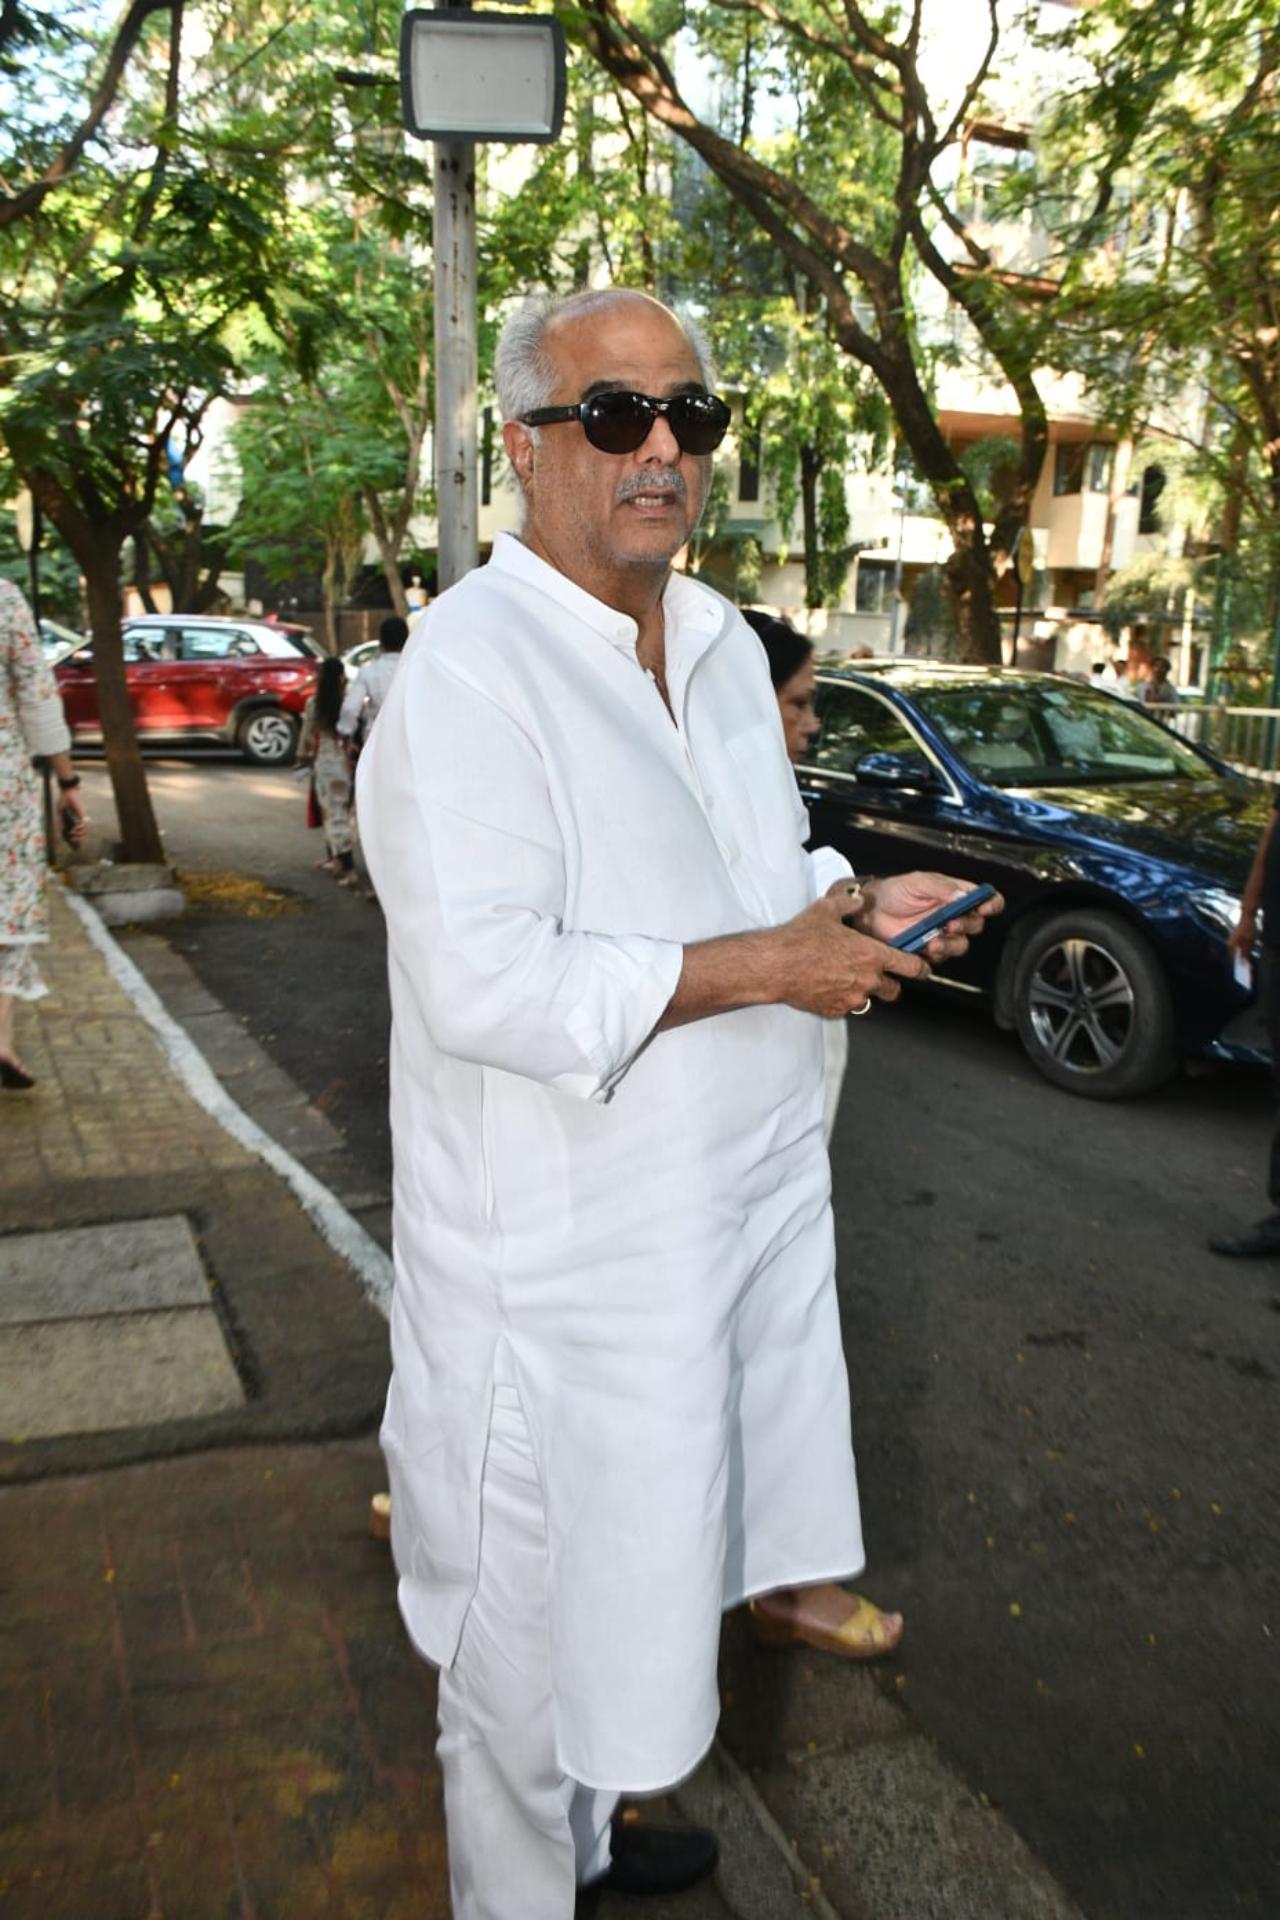 Boney Kapoor and his daughter Anshula were also seen at the prayer meet